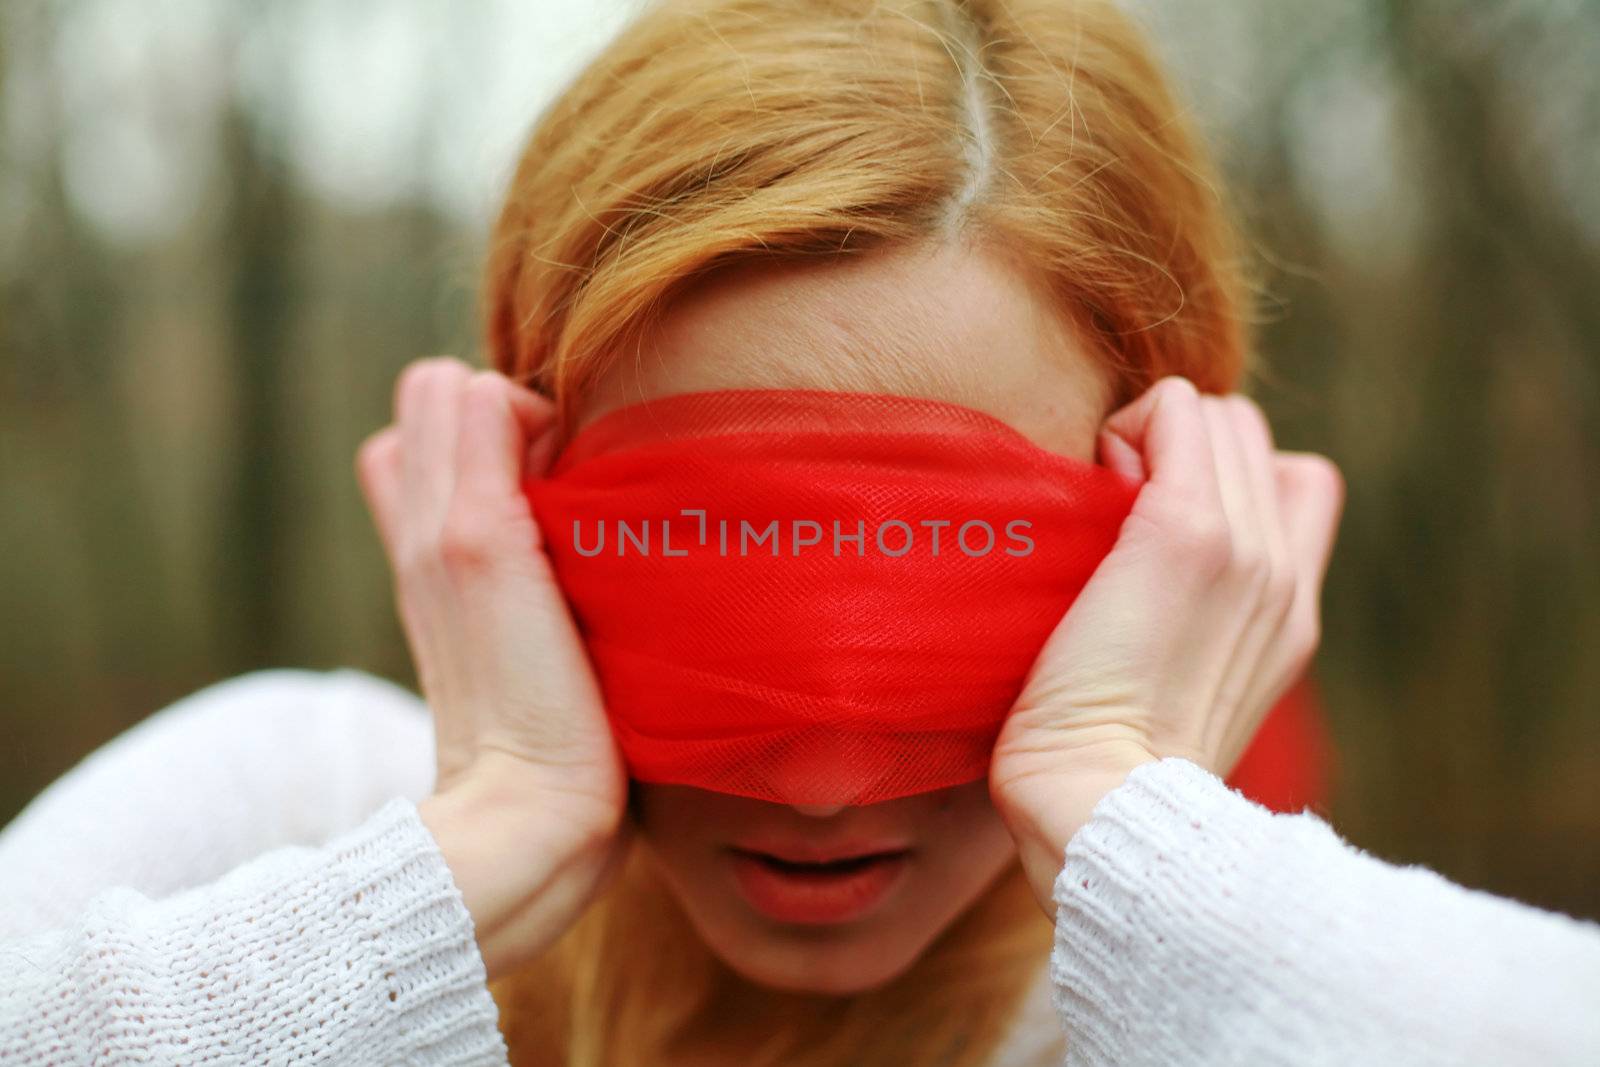 An image of blindfolded woman in the forest